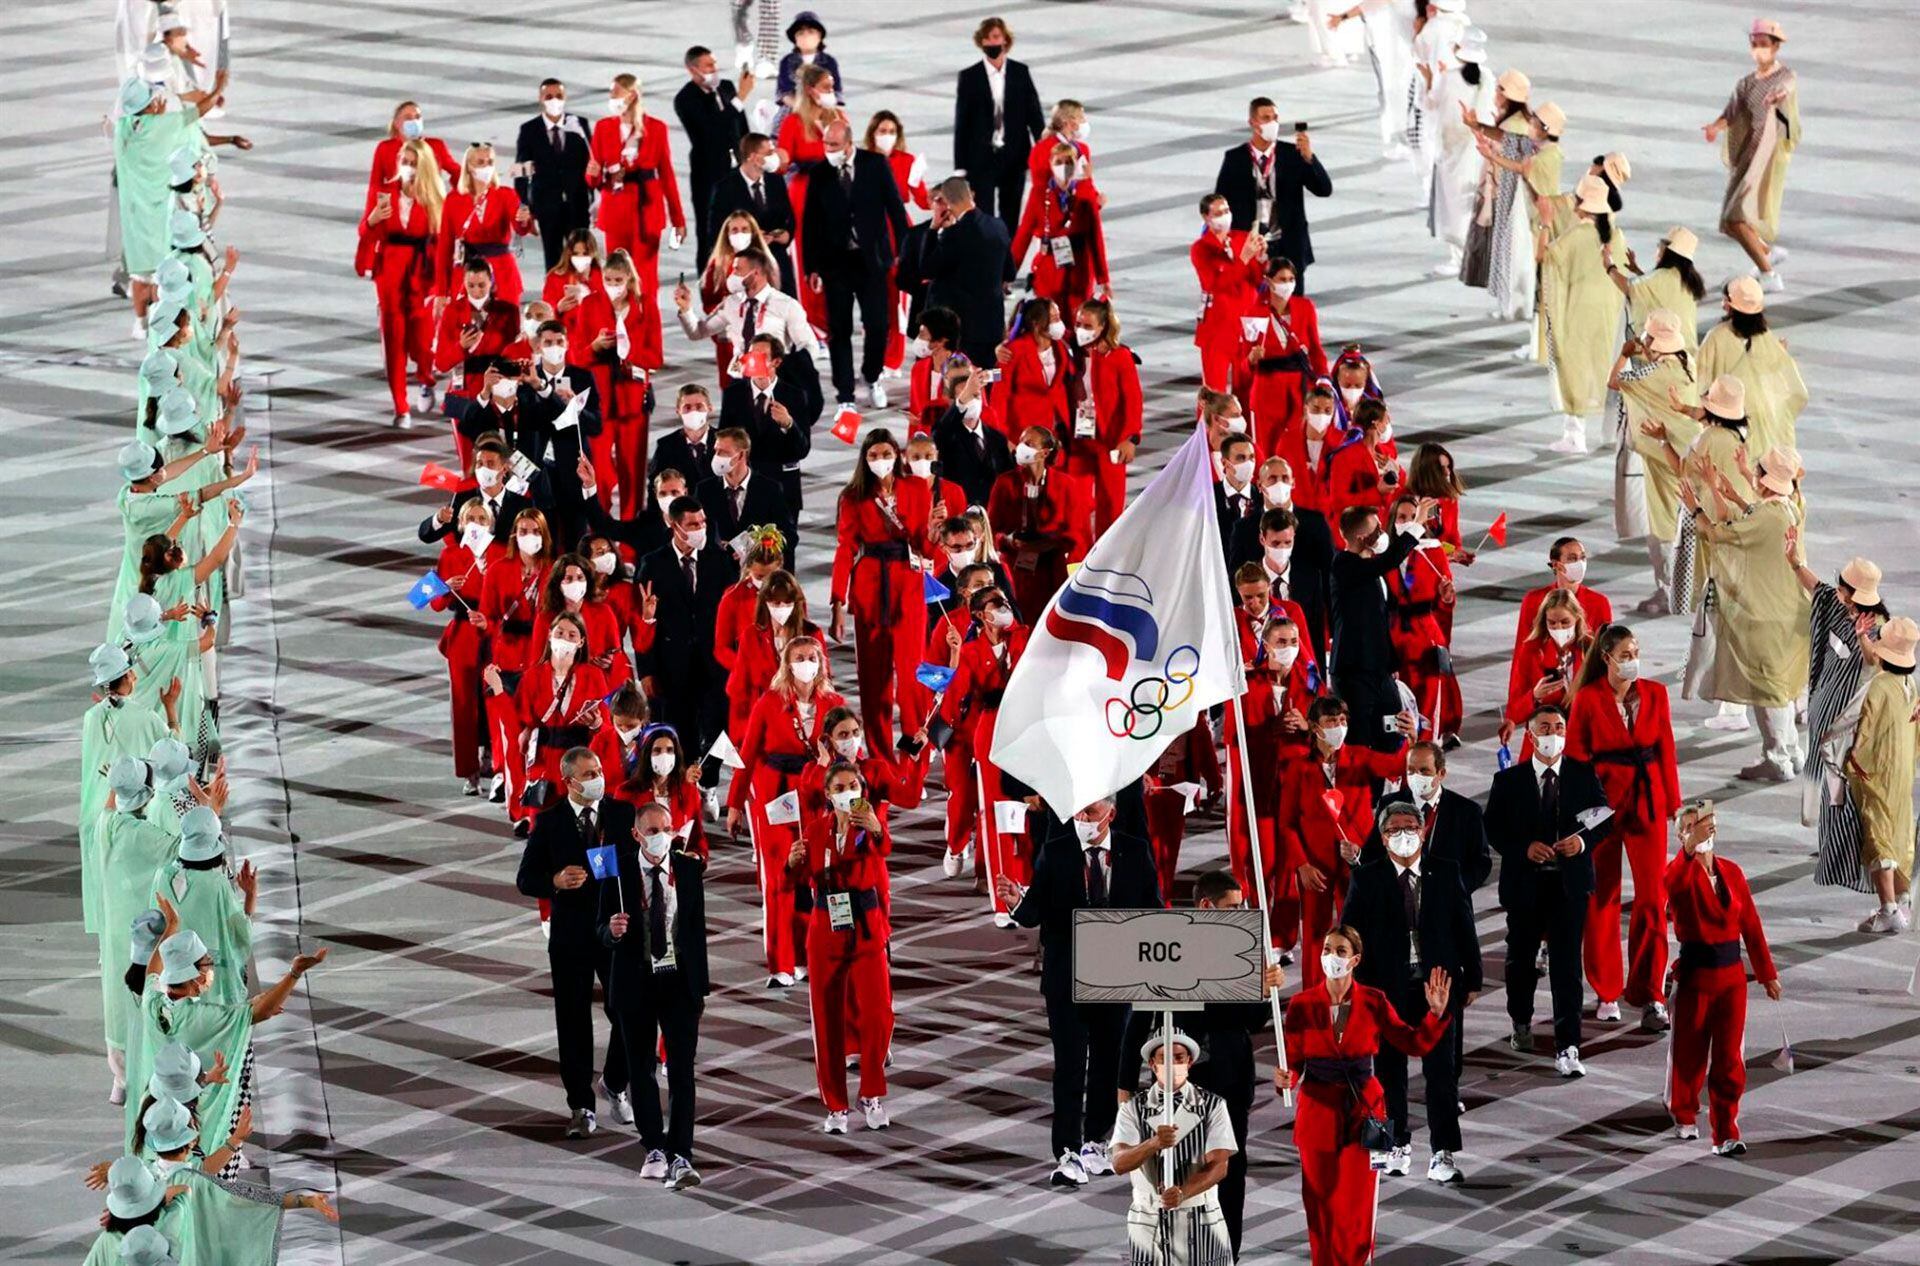 Russian athletes participated in the Tokyo 2020 Games under the name of ROC